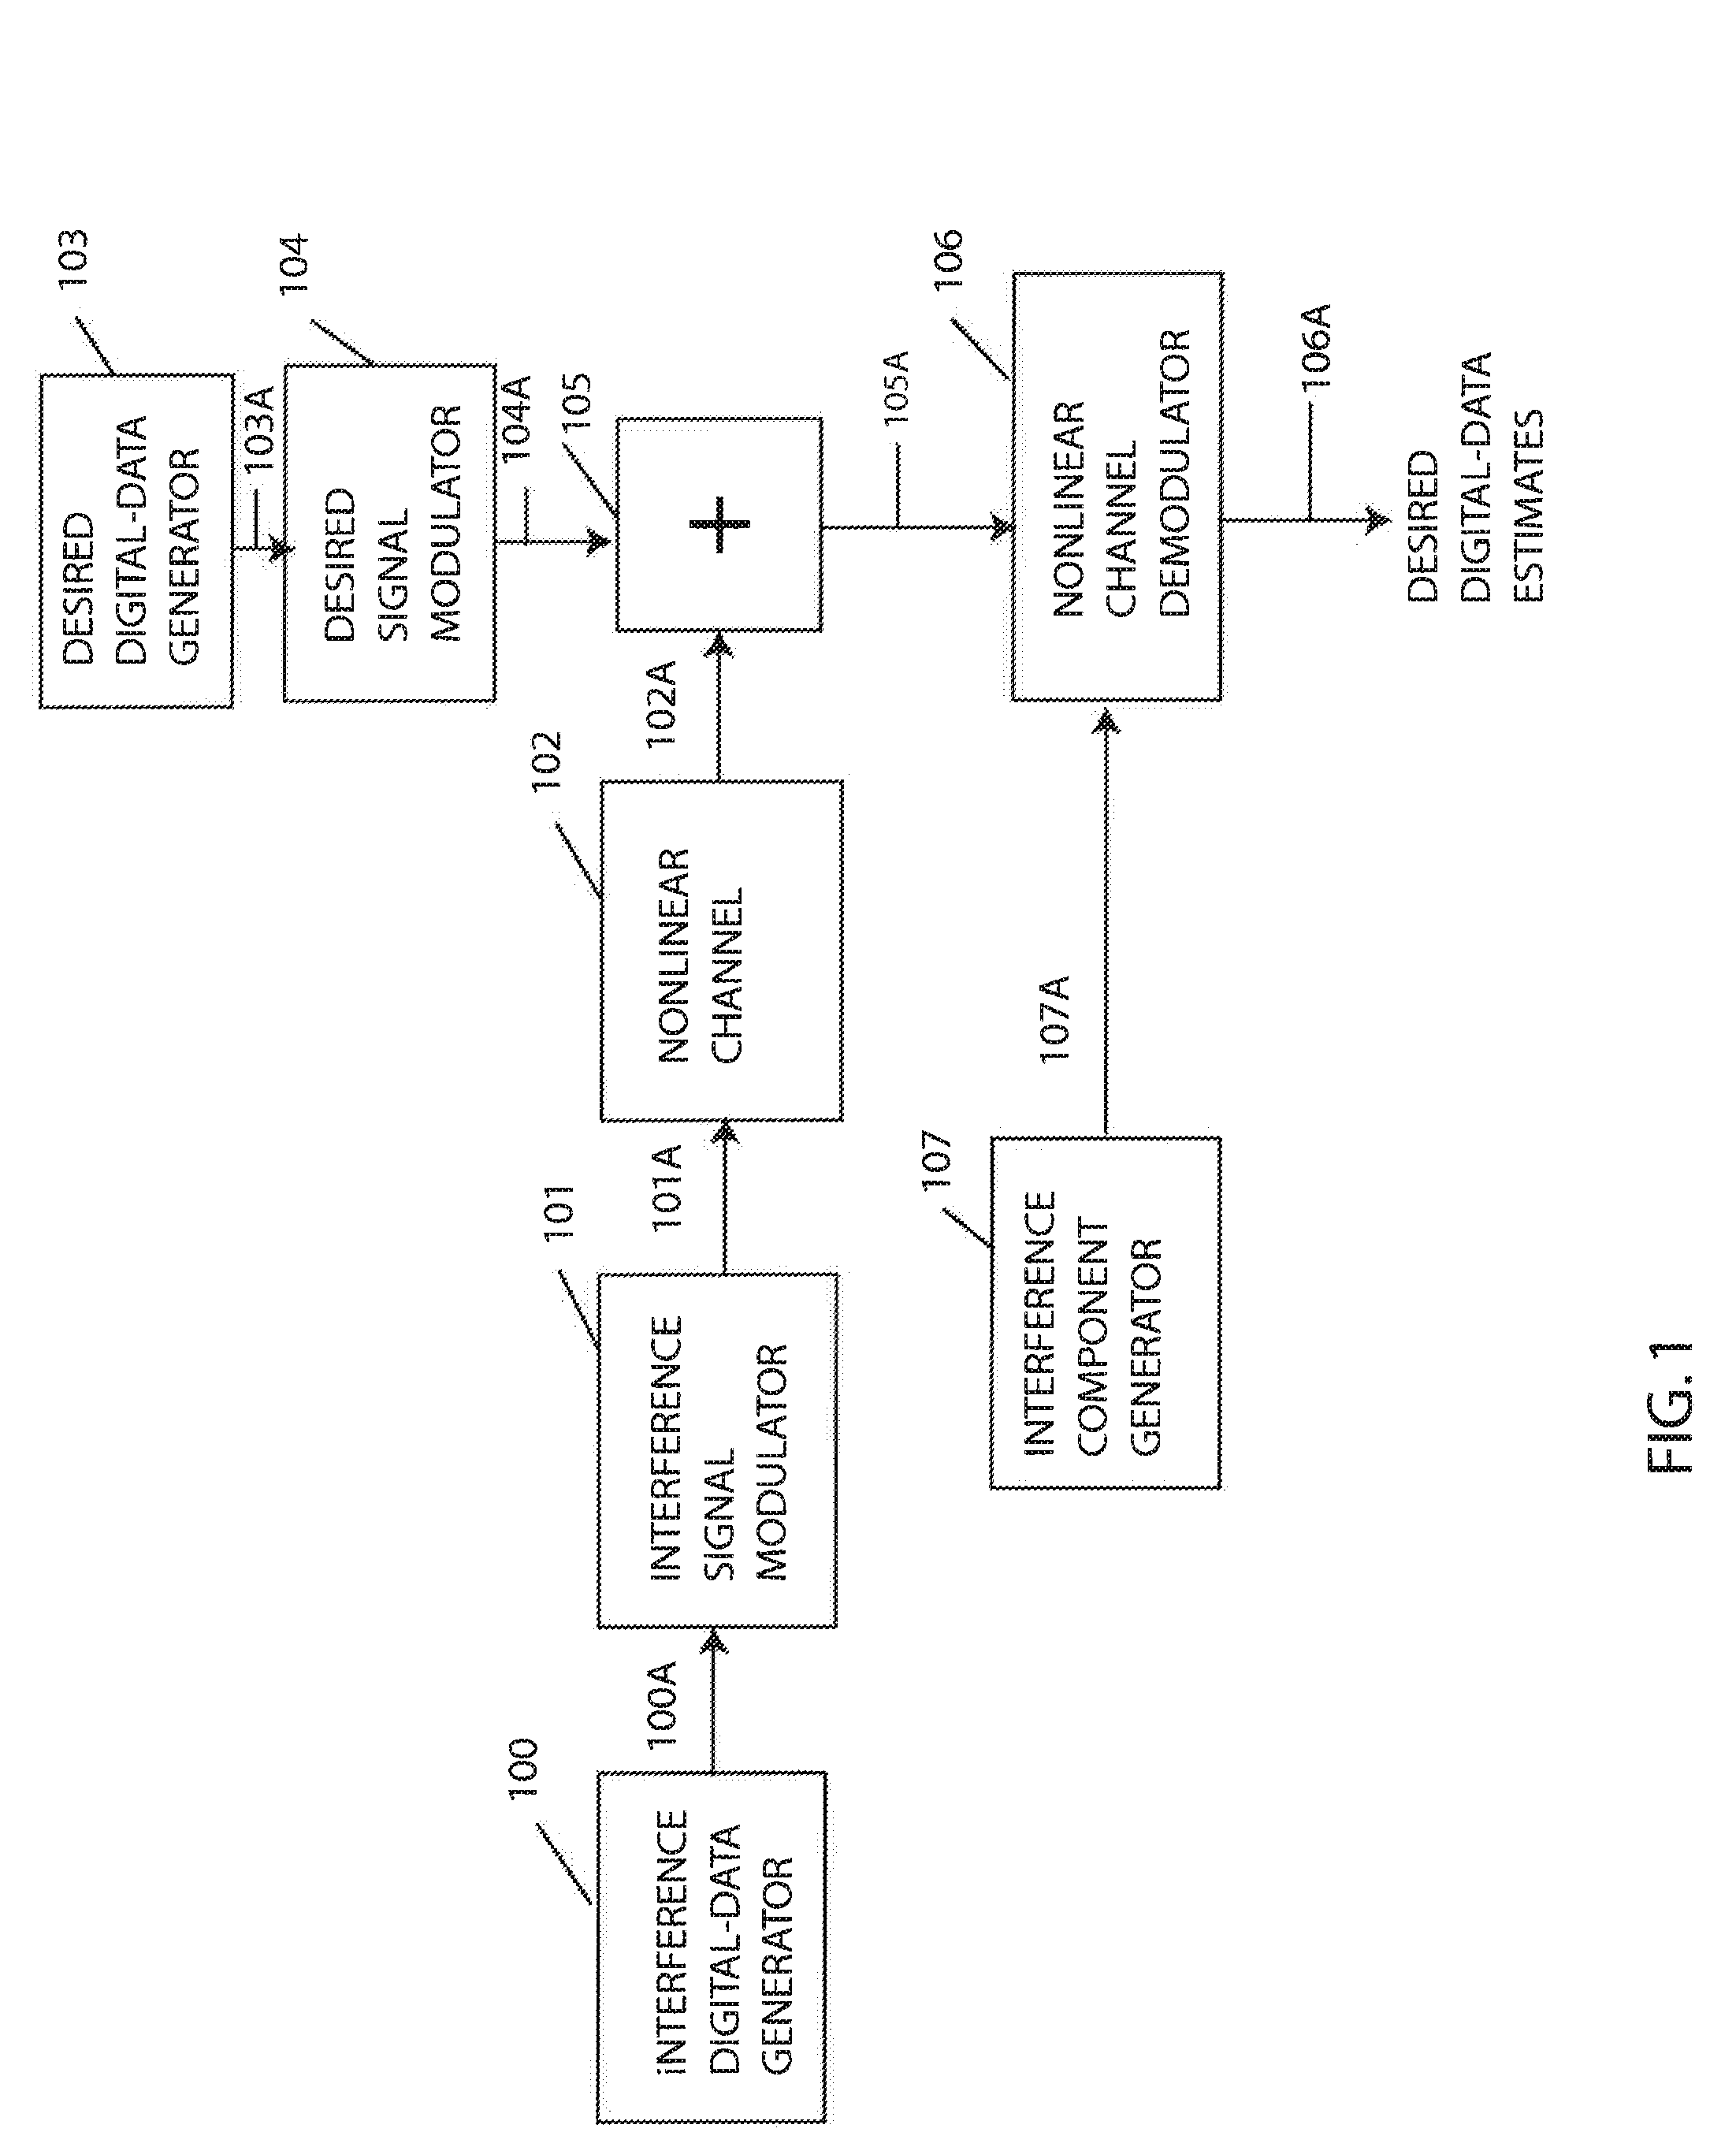 Method and apparatus for demodulation of a desired signal in the presence of nonlinear-distorted interference